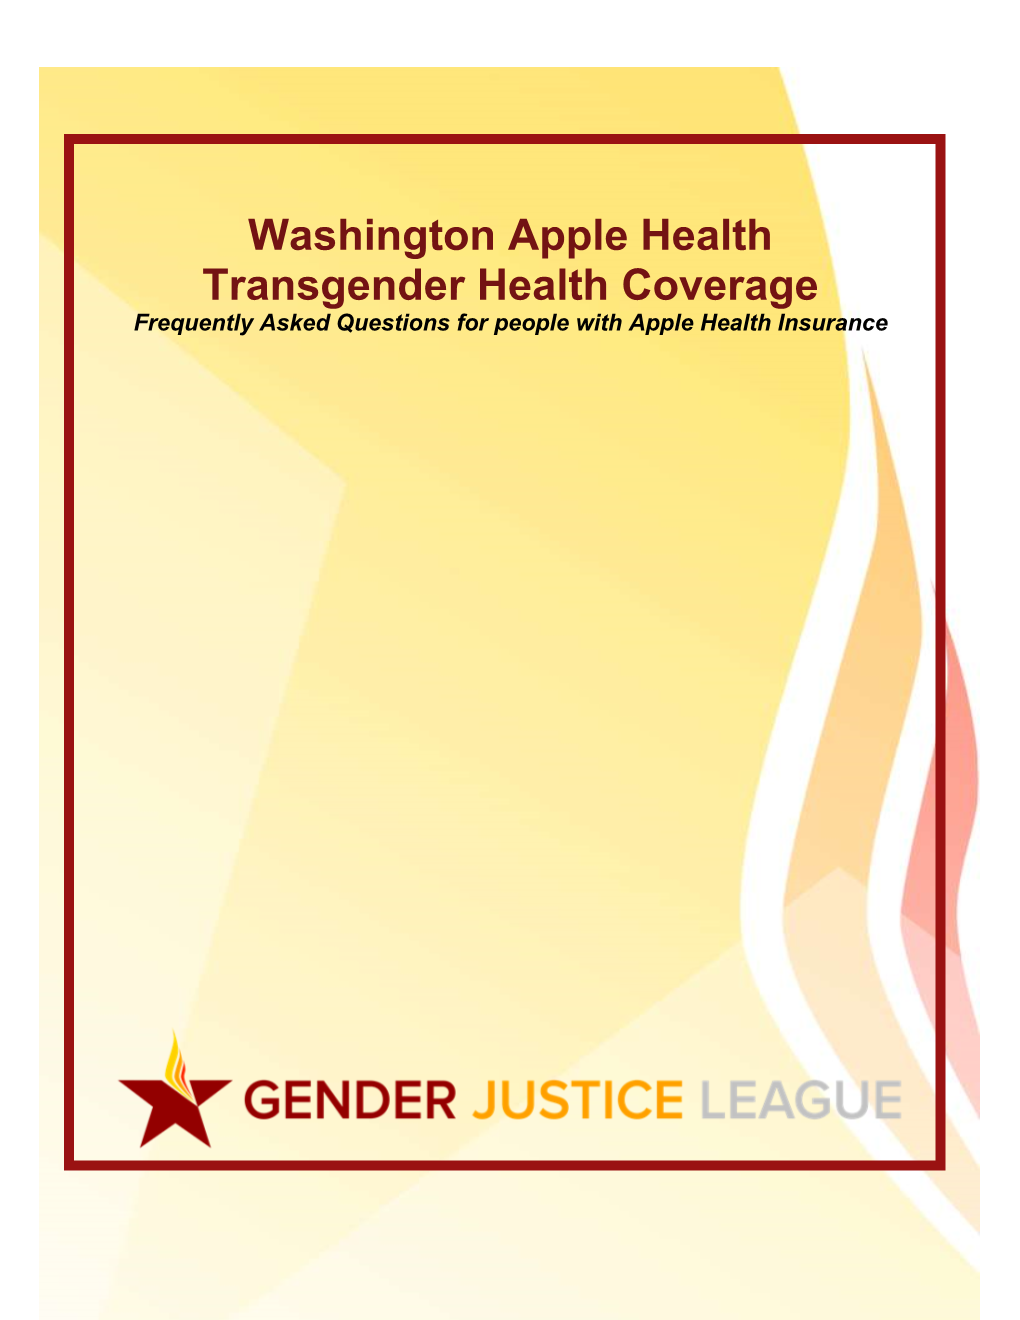 Washington Apple Health Transgender Health Coverage Frequently Asked Questions for People with Apple Health Insurance